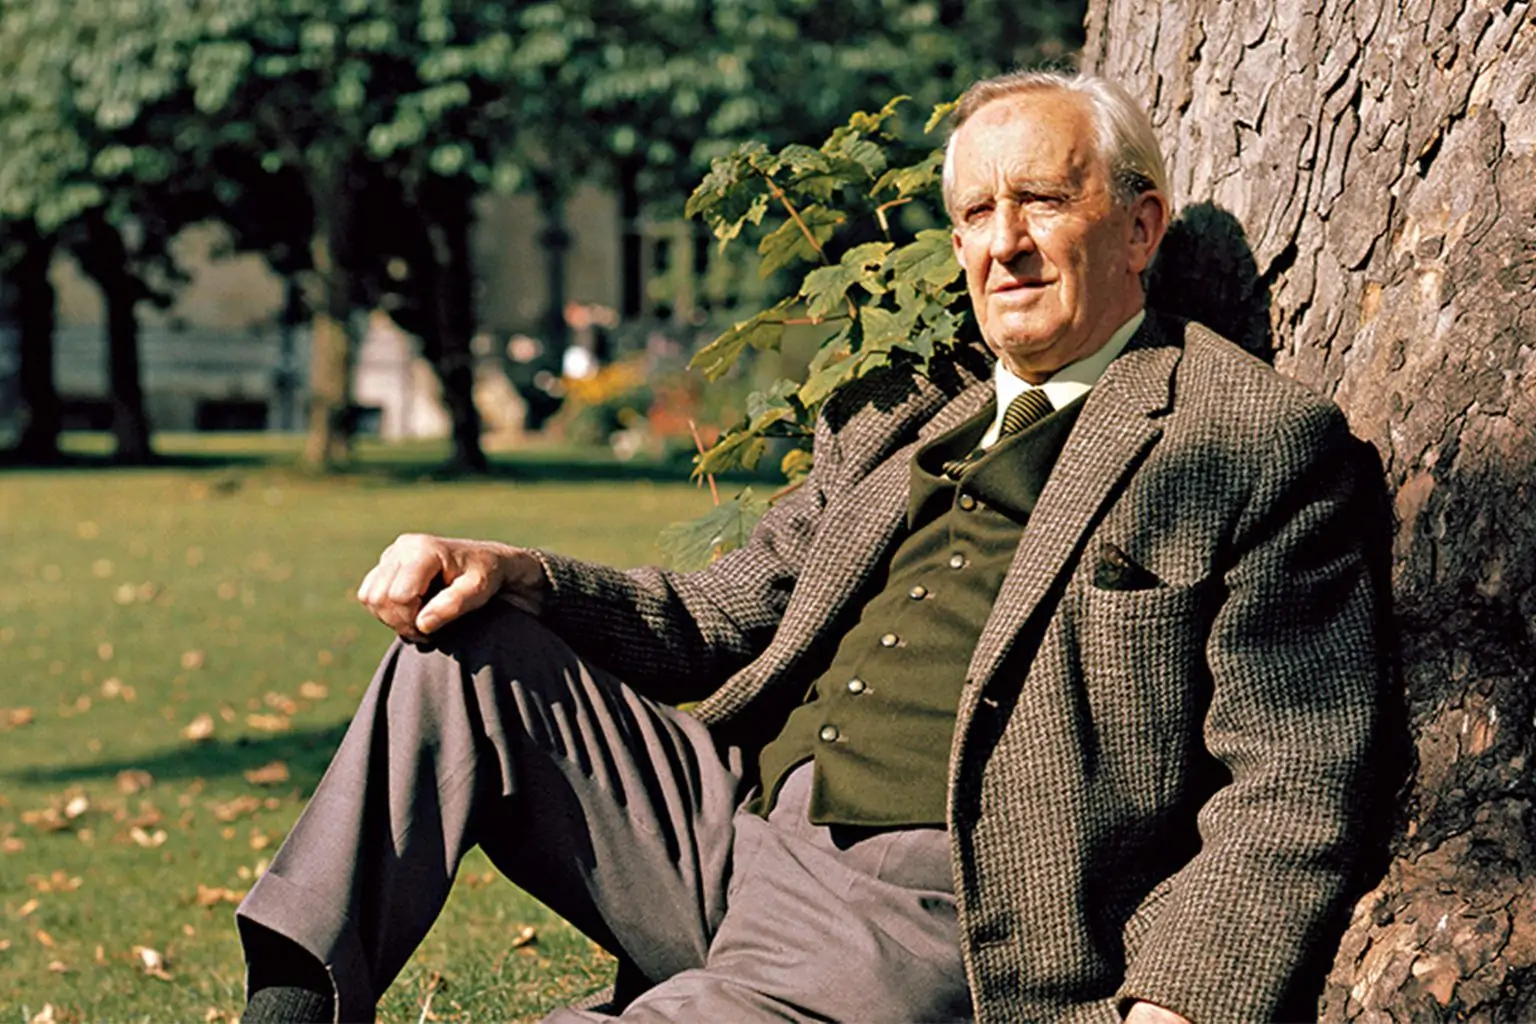 J.R.R. Tolkien Sitting While Leaning On A Tree